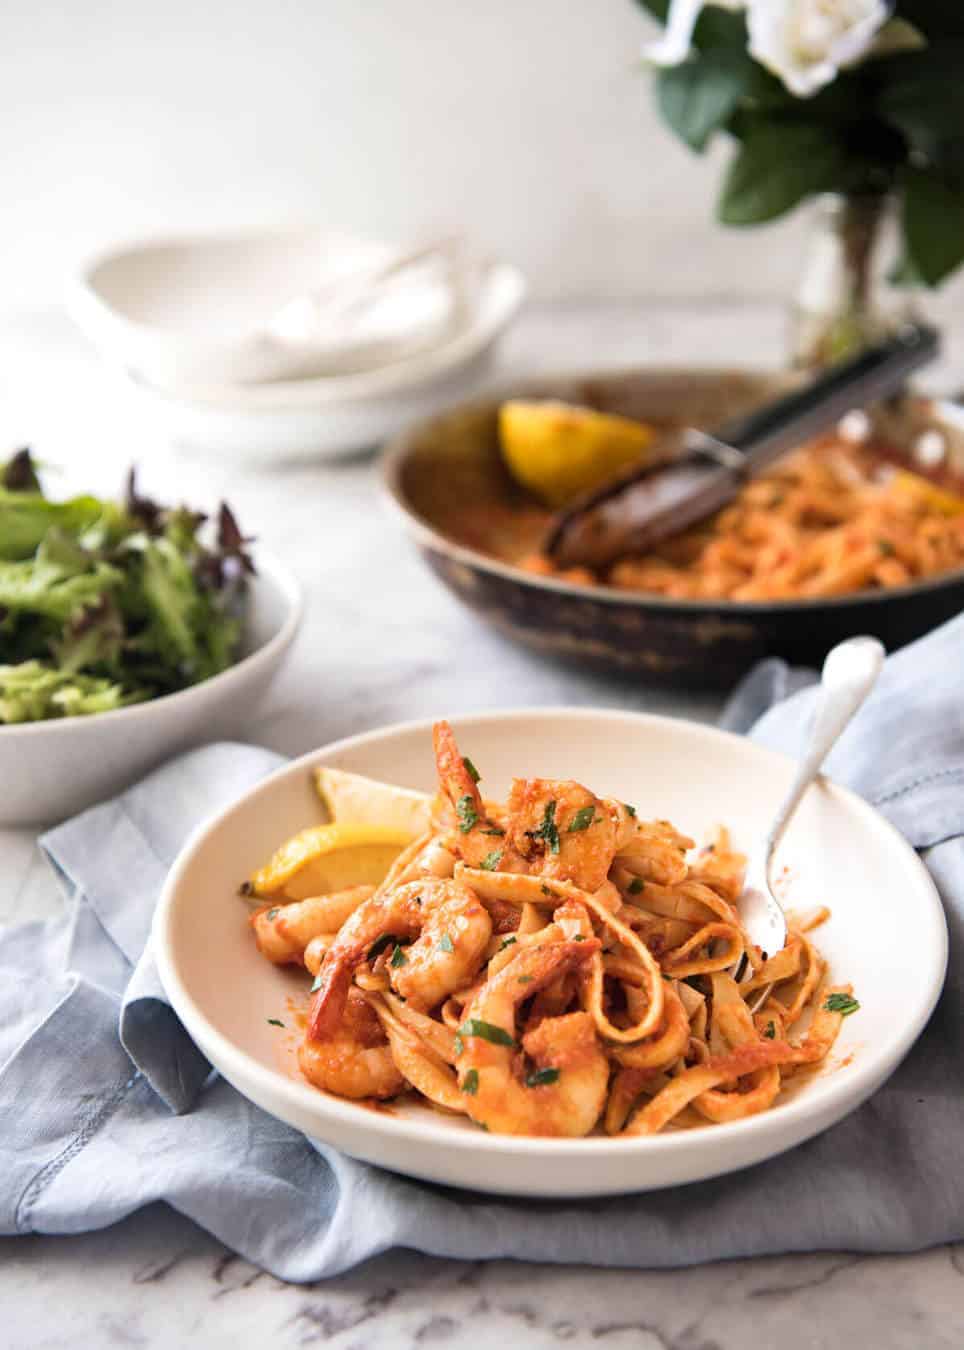 Spicy Chilli Prawn Pasta (Shrimp) - A super quick 15 minute meal with a secret ingredient that makes all the difference! www.recipetineats.com